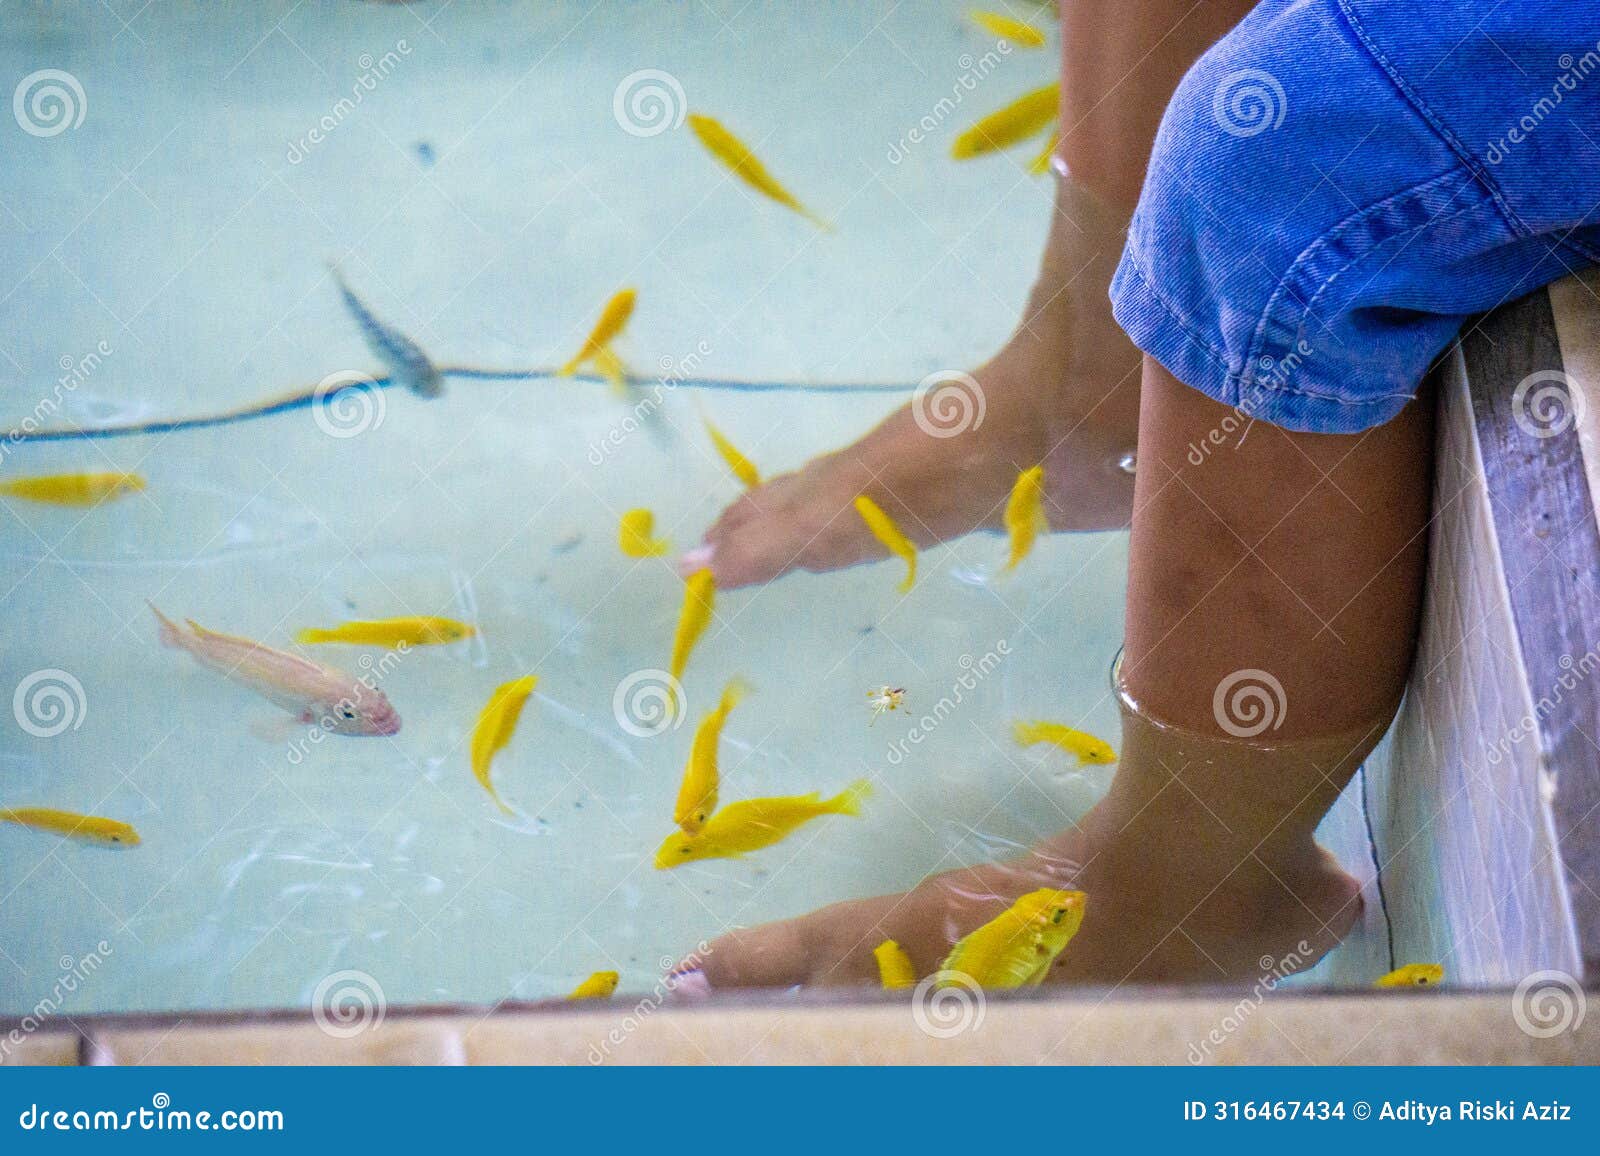 fish pedicures, also known as garra rufa therapy. this fish eats dead skin cells